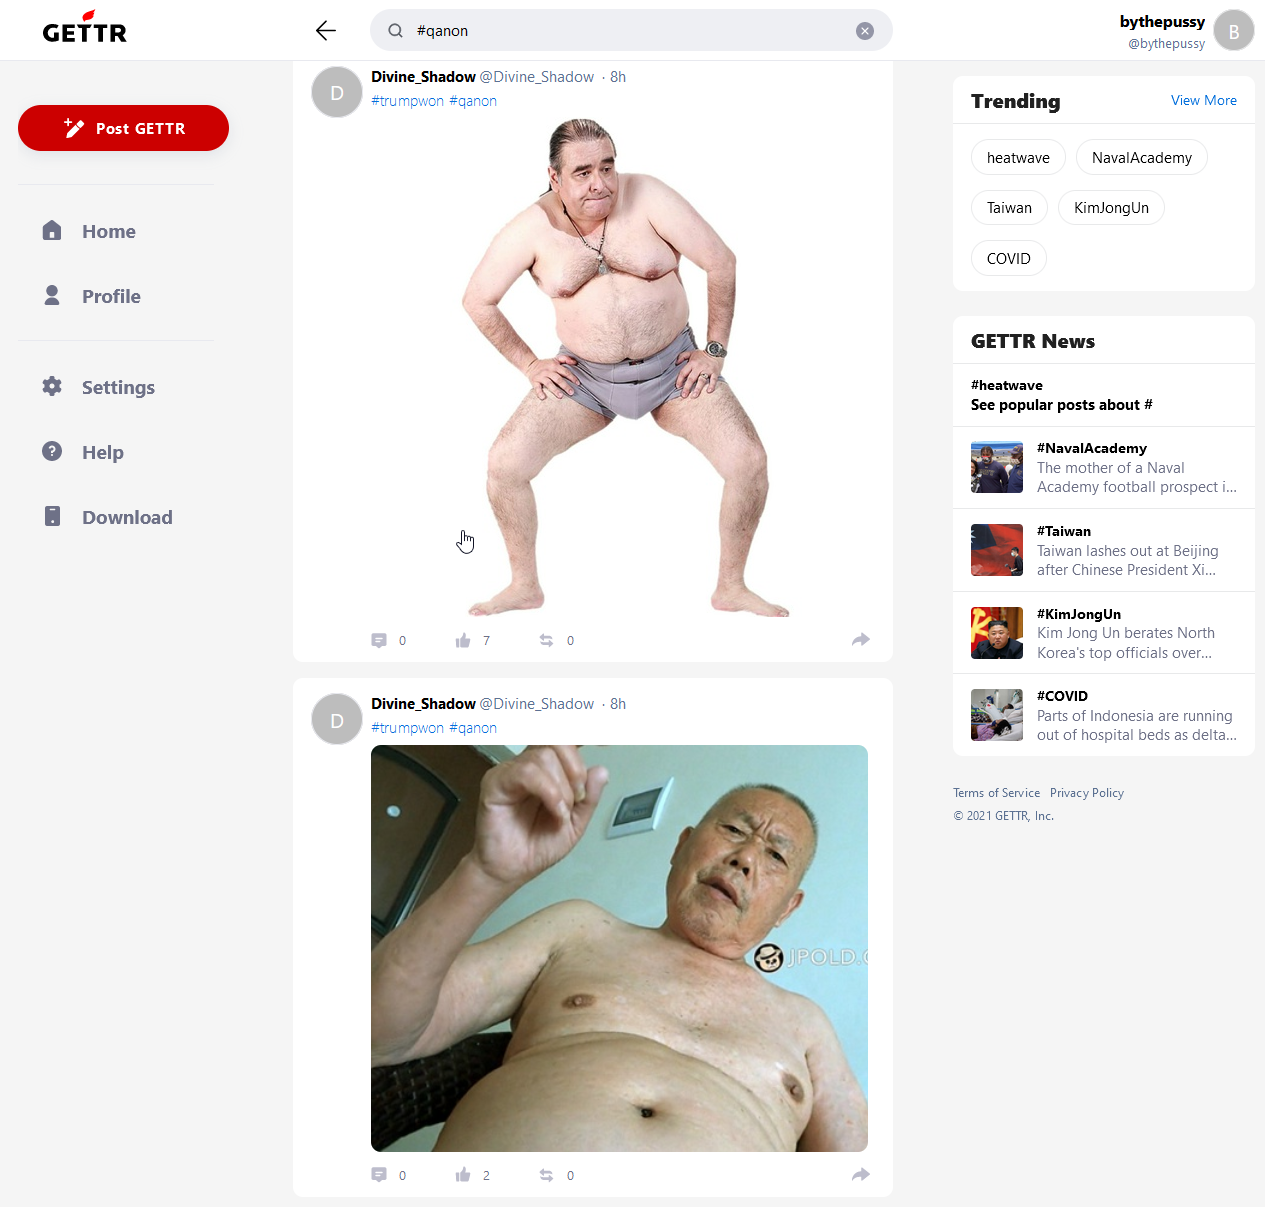 Photos of half-dressed old men, some in diapers, that appeared in a search for QAnon on GETTR on Friday. (Screenshot: GETTR)